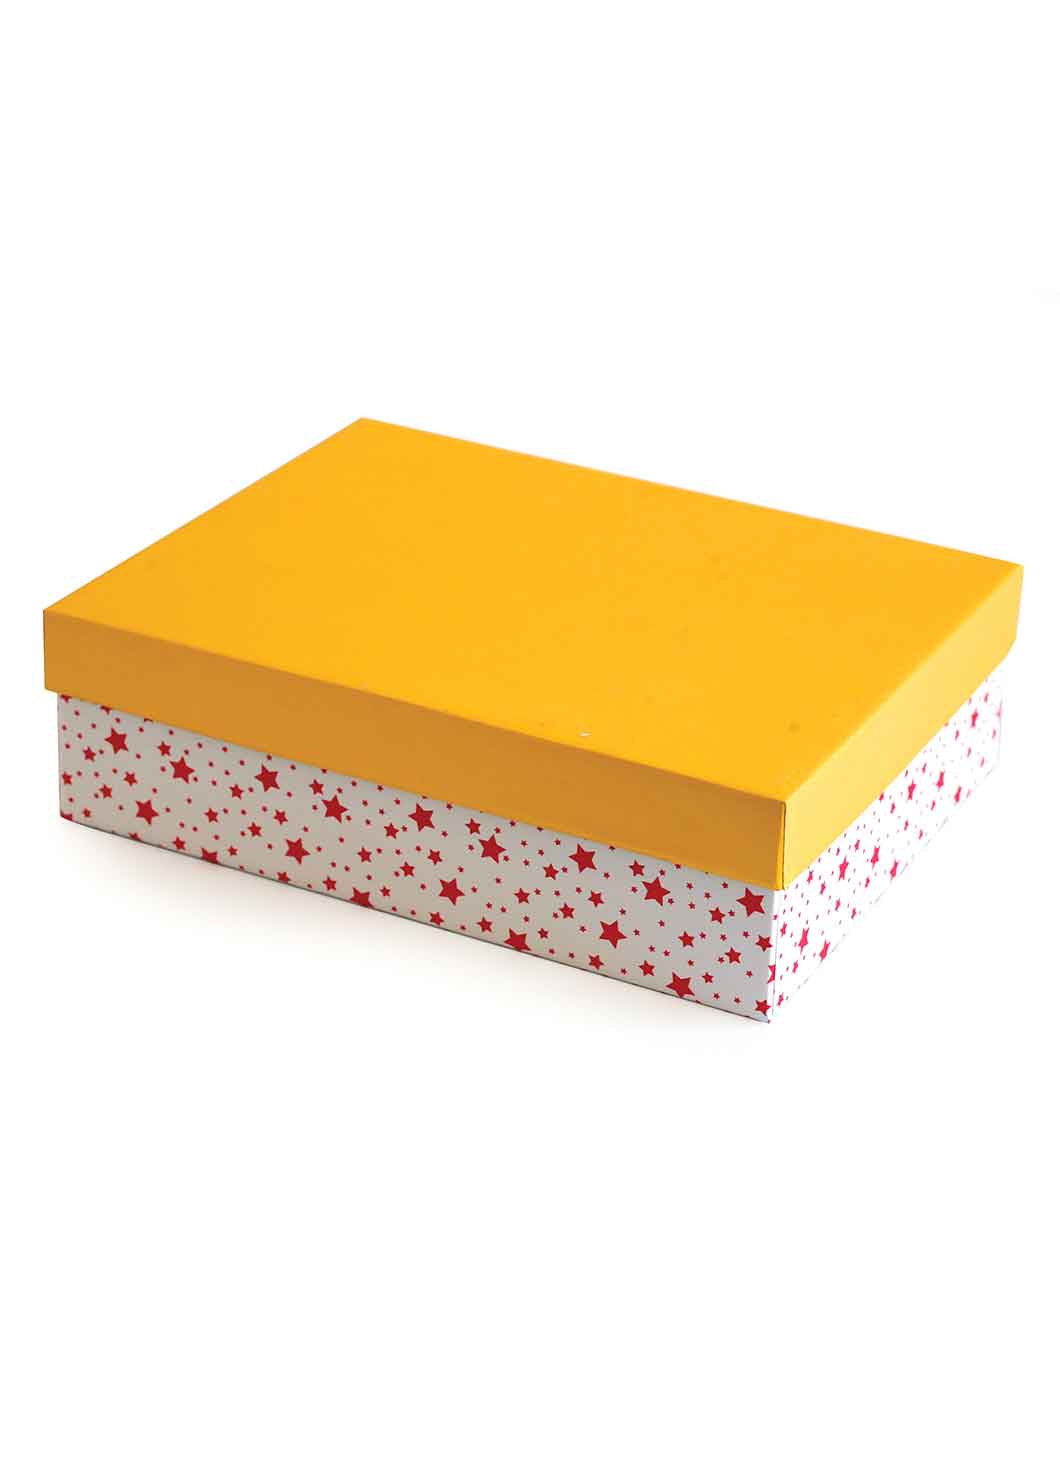 Black and White Star - Golden White And Red Star Design Box For Cloth Packing Packing